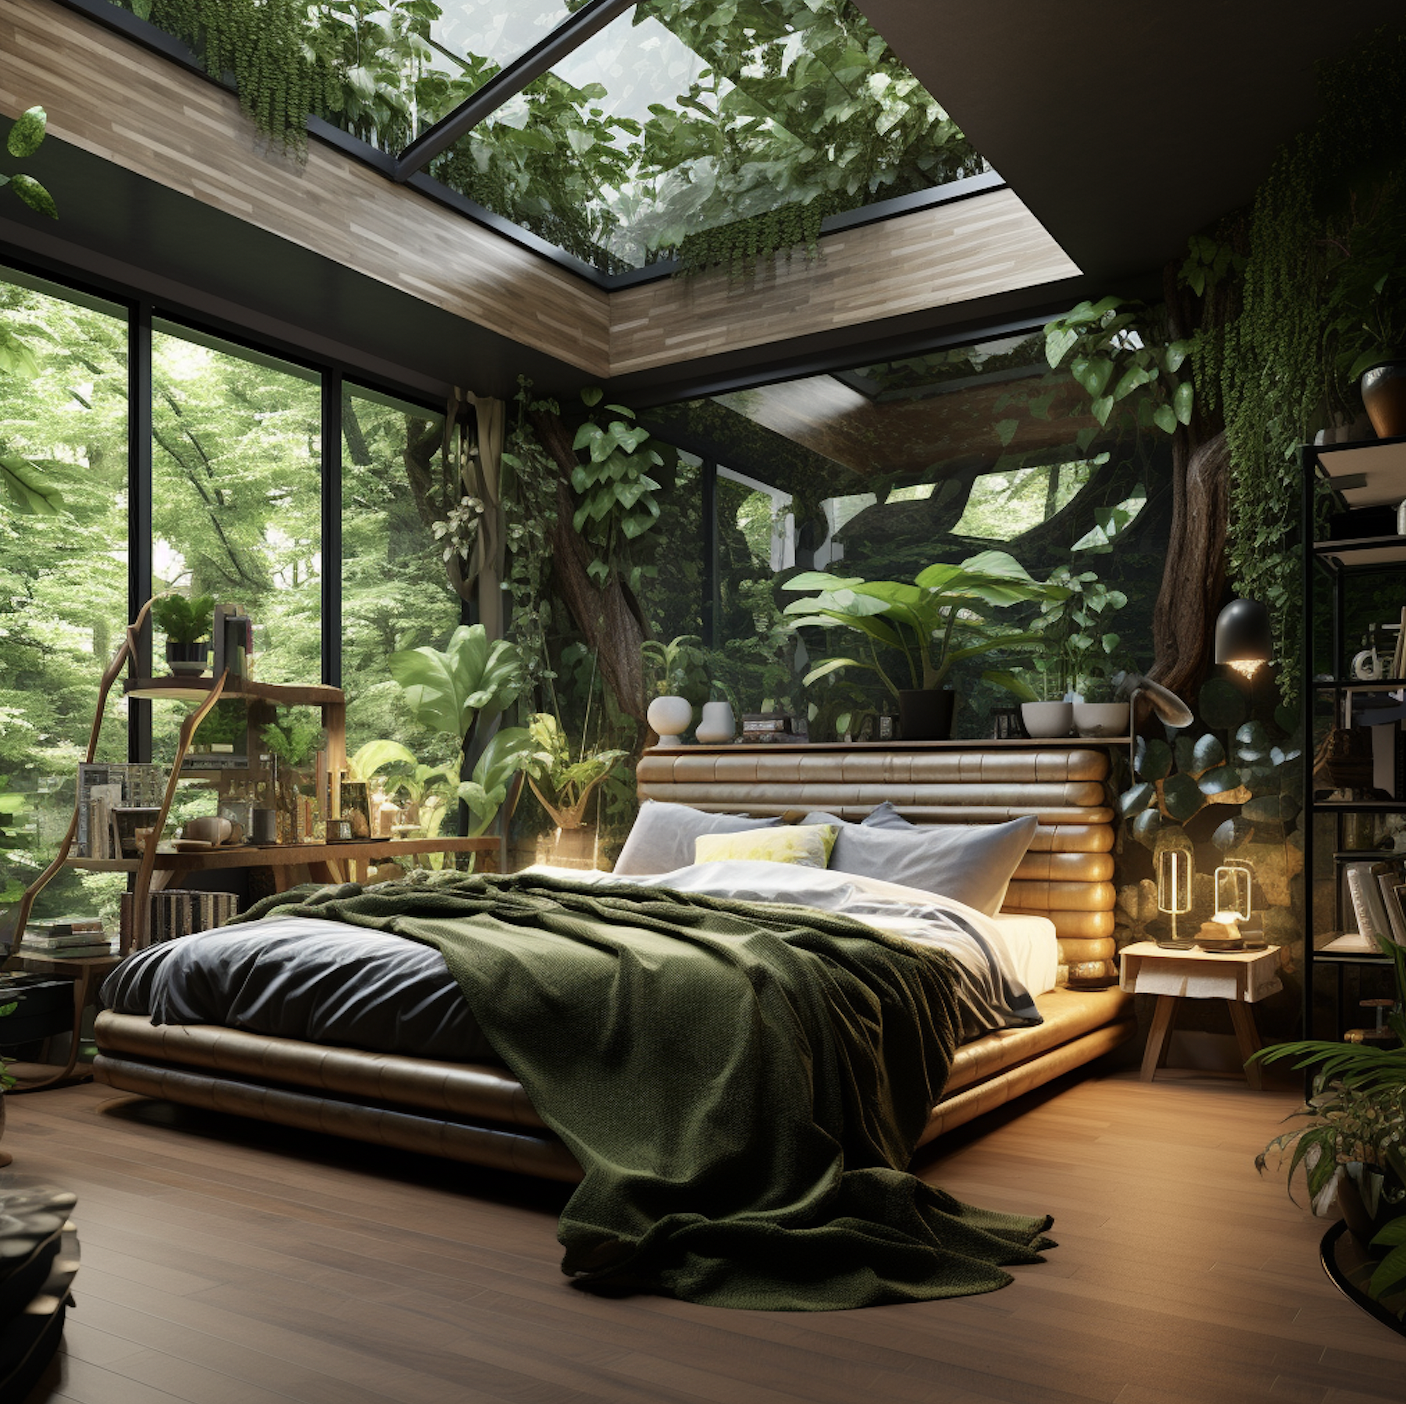 A bedroom with windows for walls and lots of natural elements.